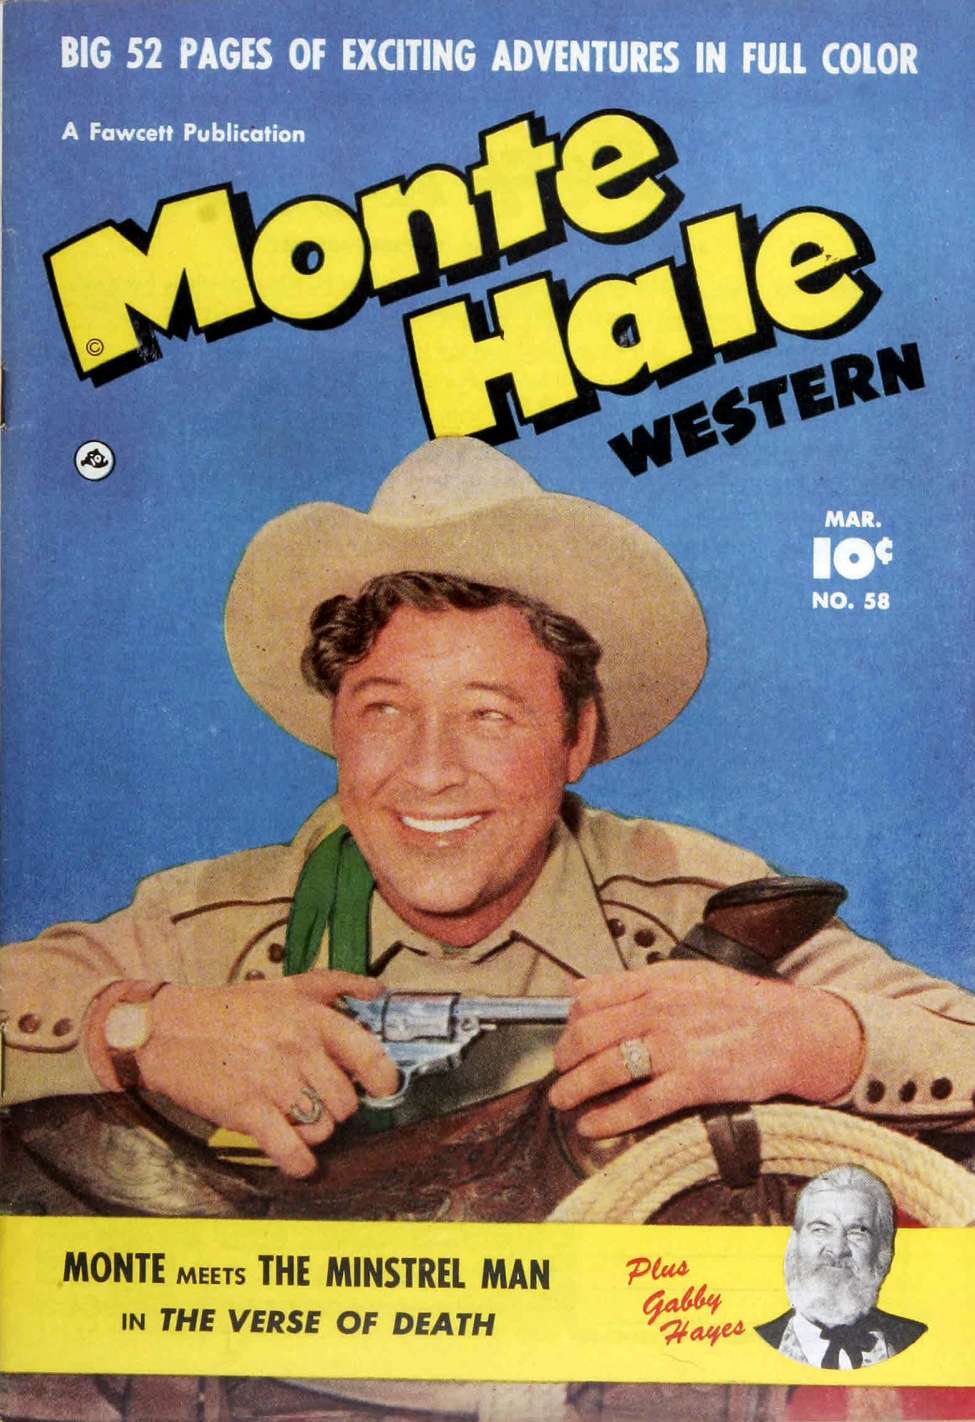 Book Cover For Monte Hale Western 58 - Version 1